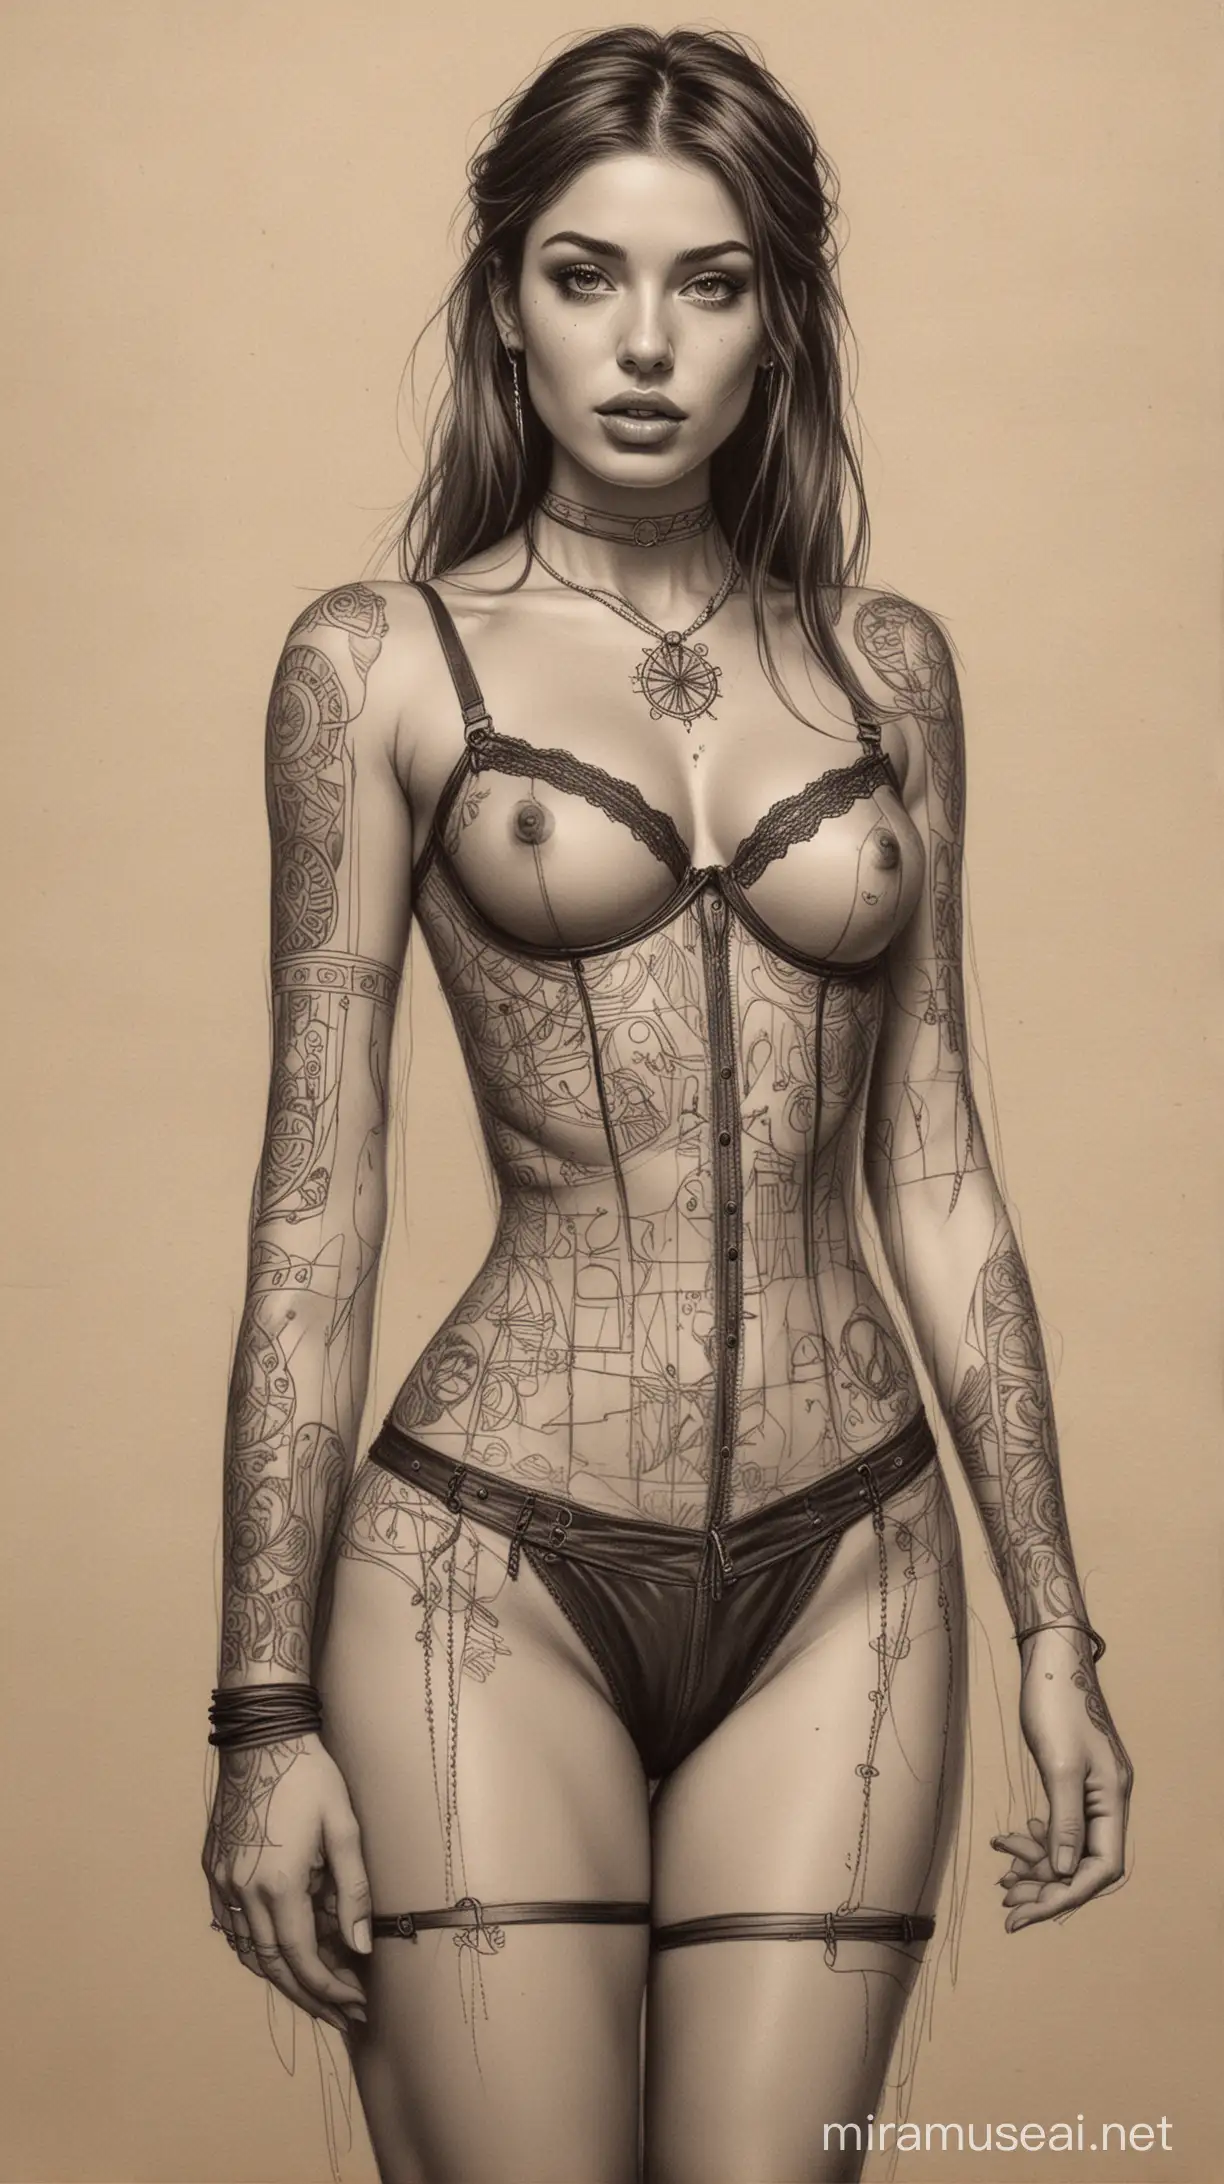 Dark Sketchbook Style Stunningly Beautiful Circus Woman Covered in Tattoos